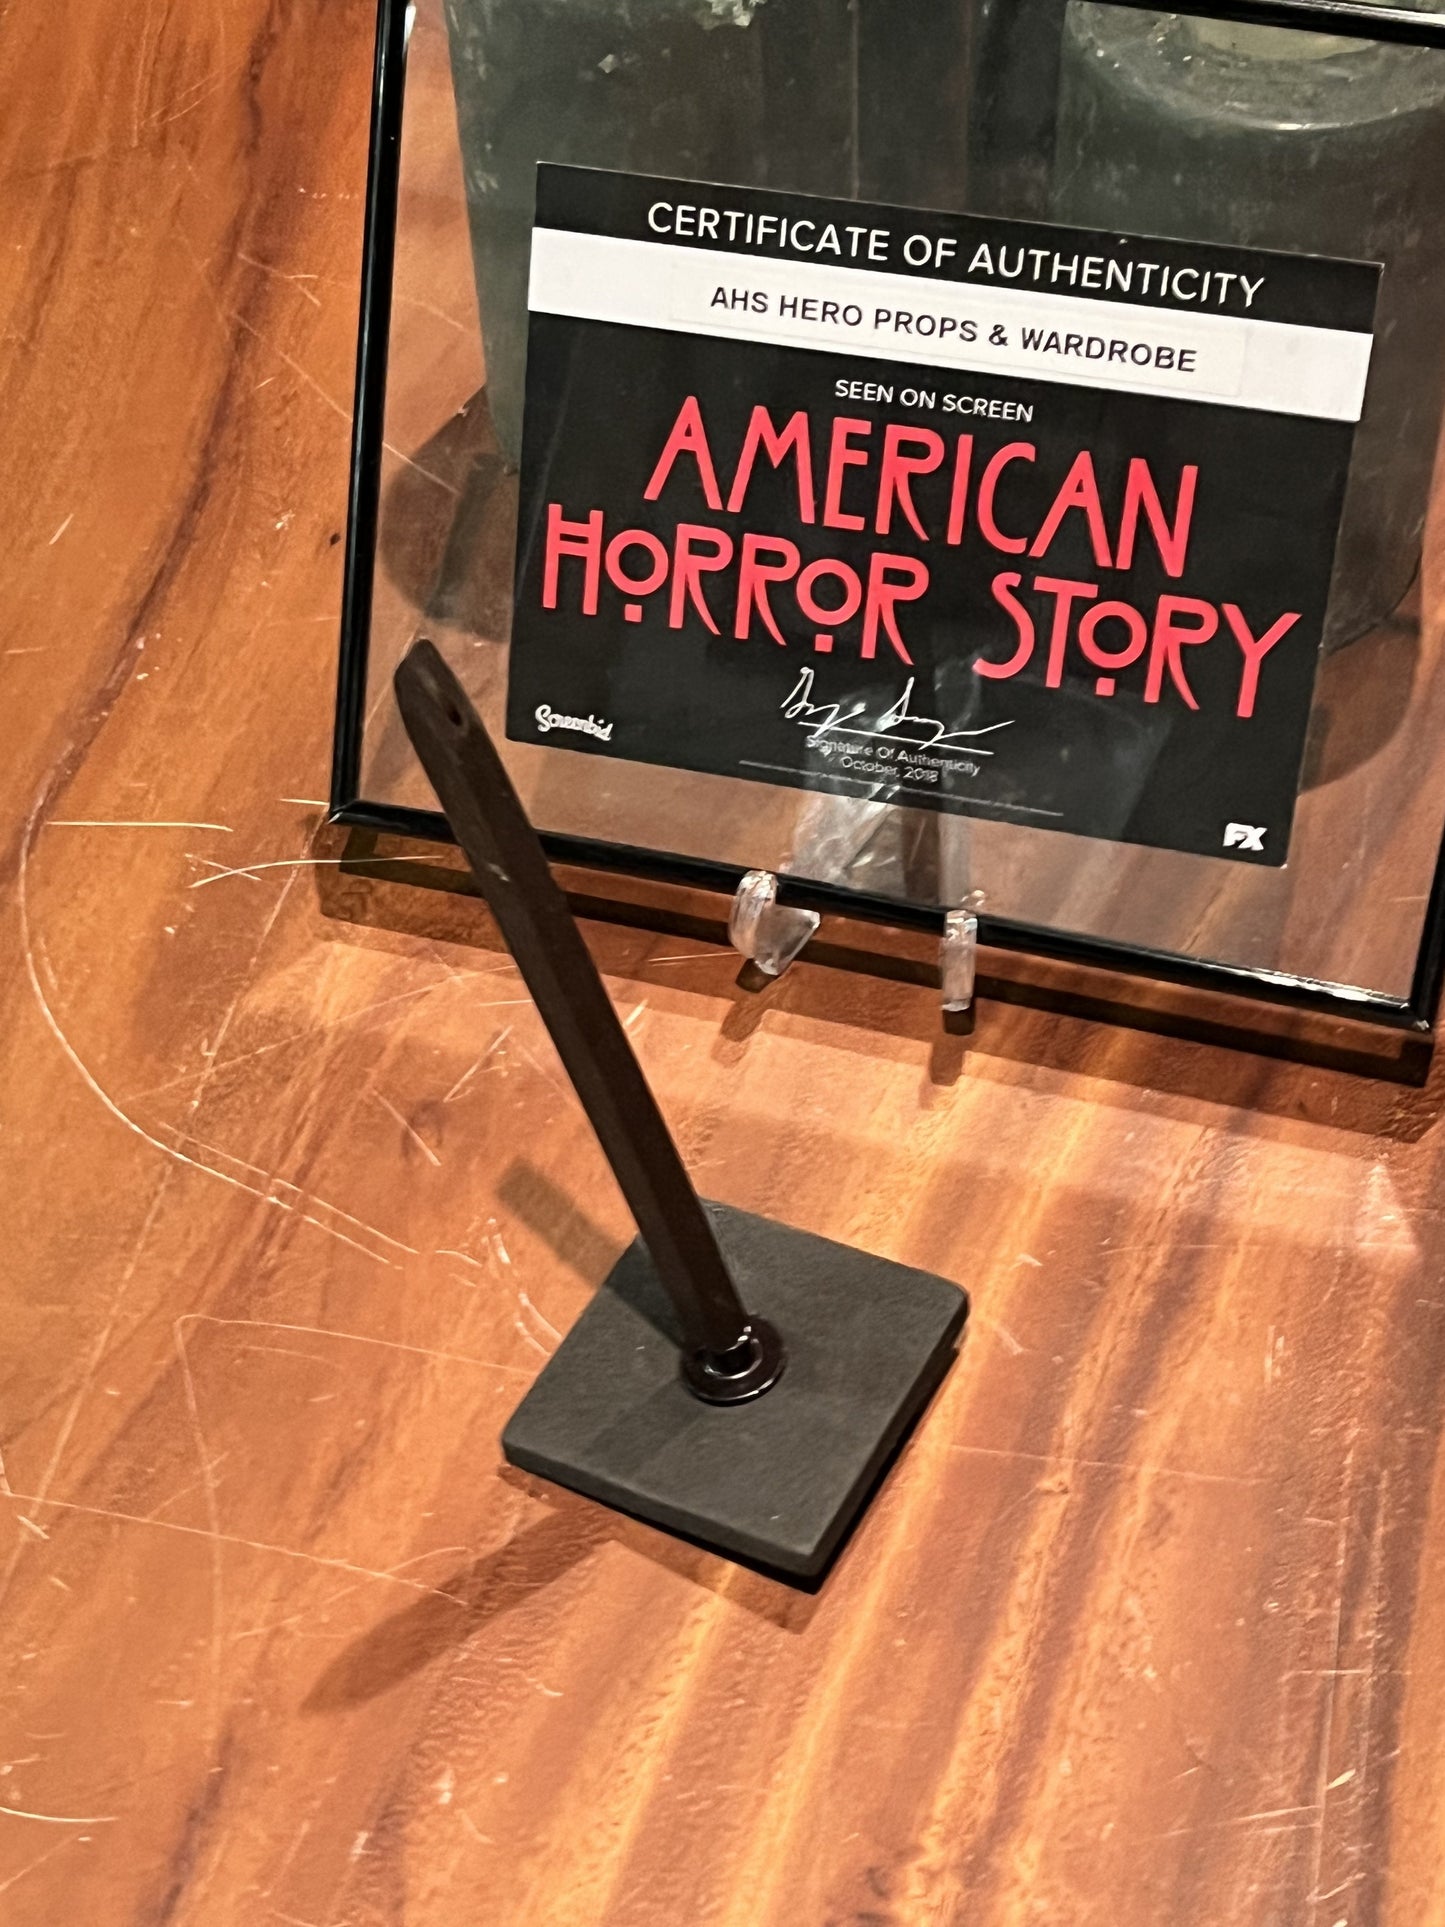 American Horror Story: HERO Prop Featured On Screen